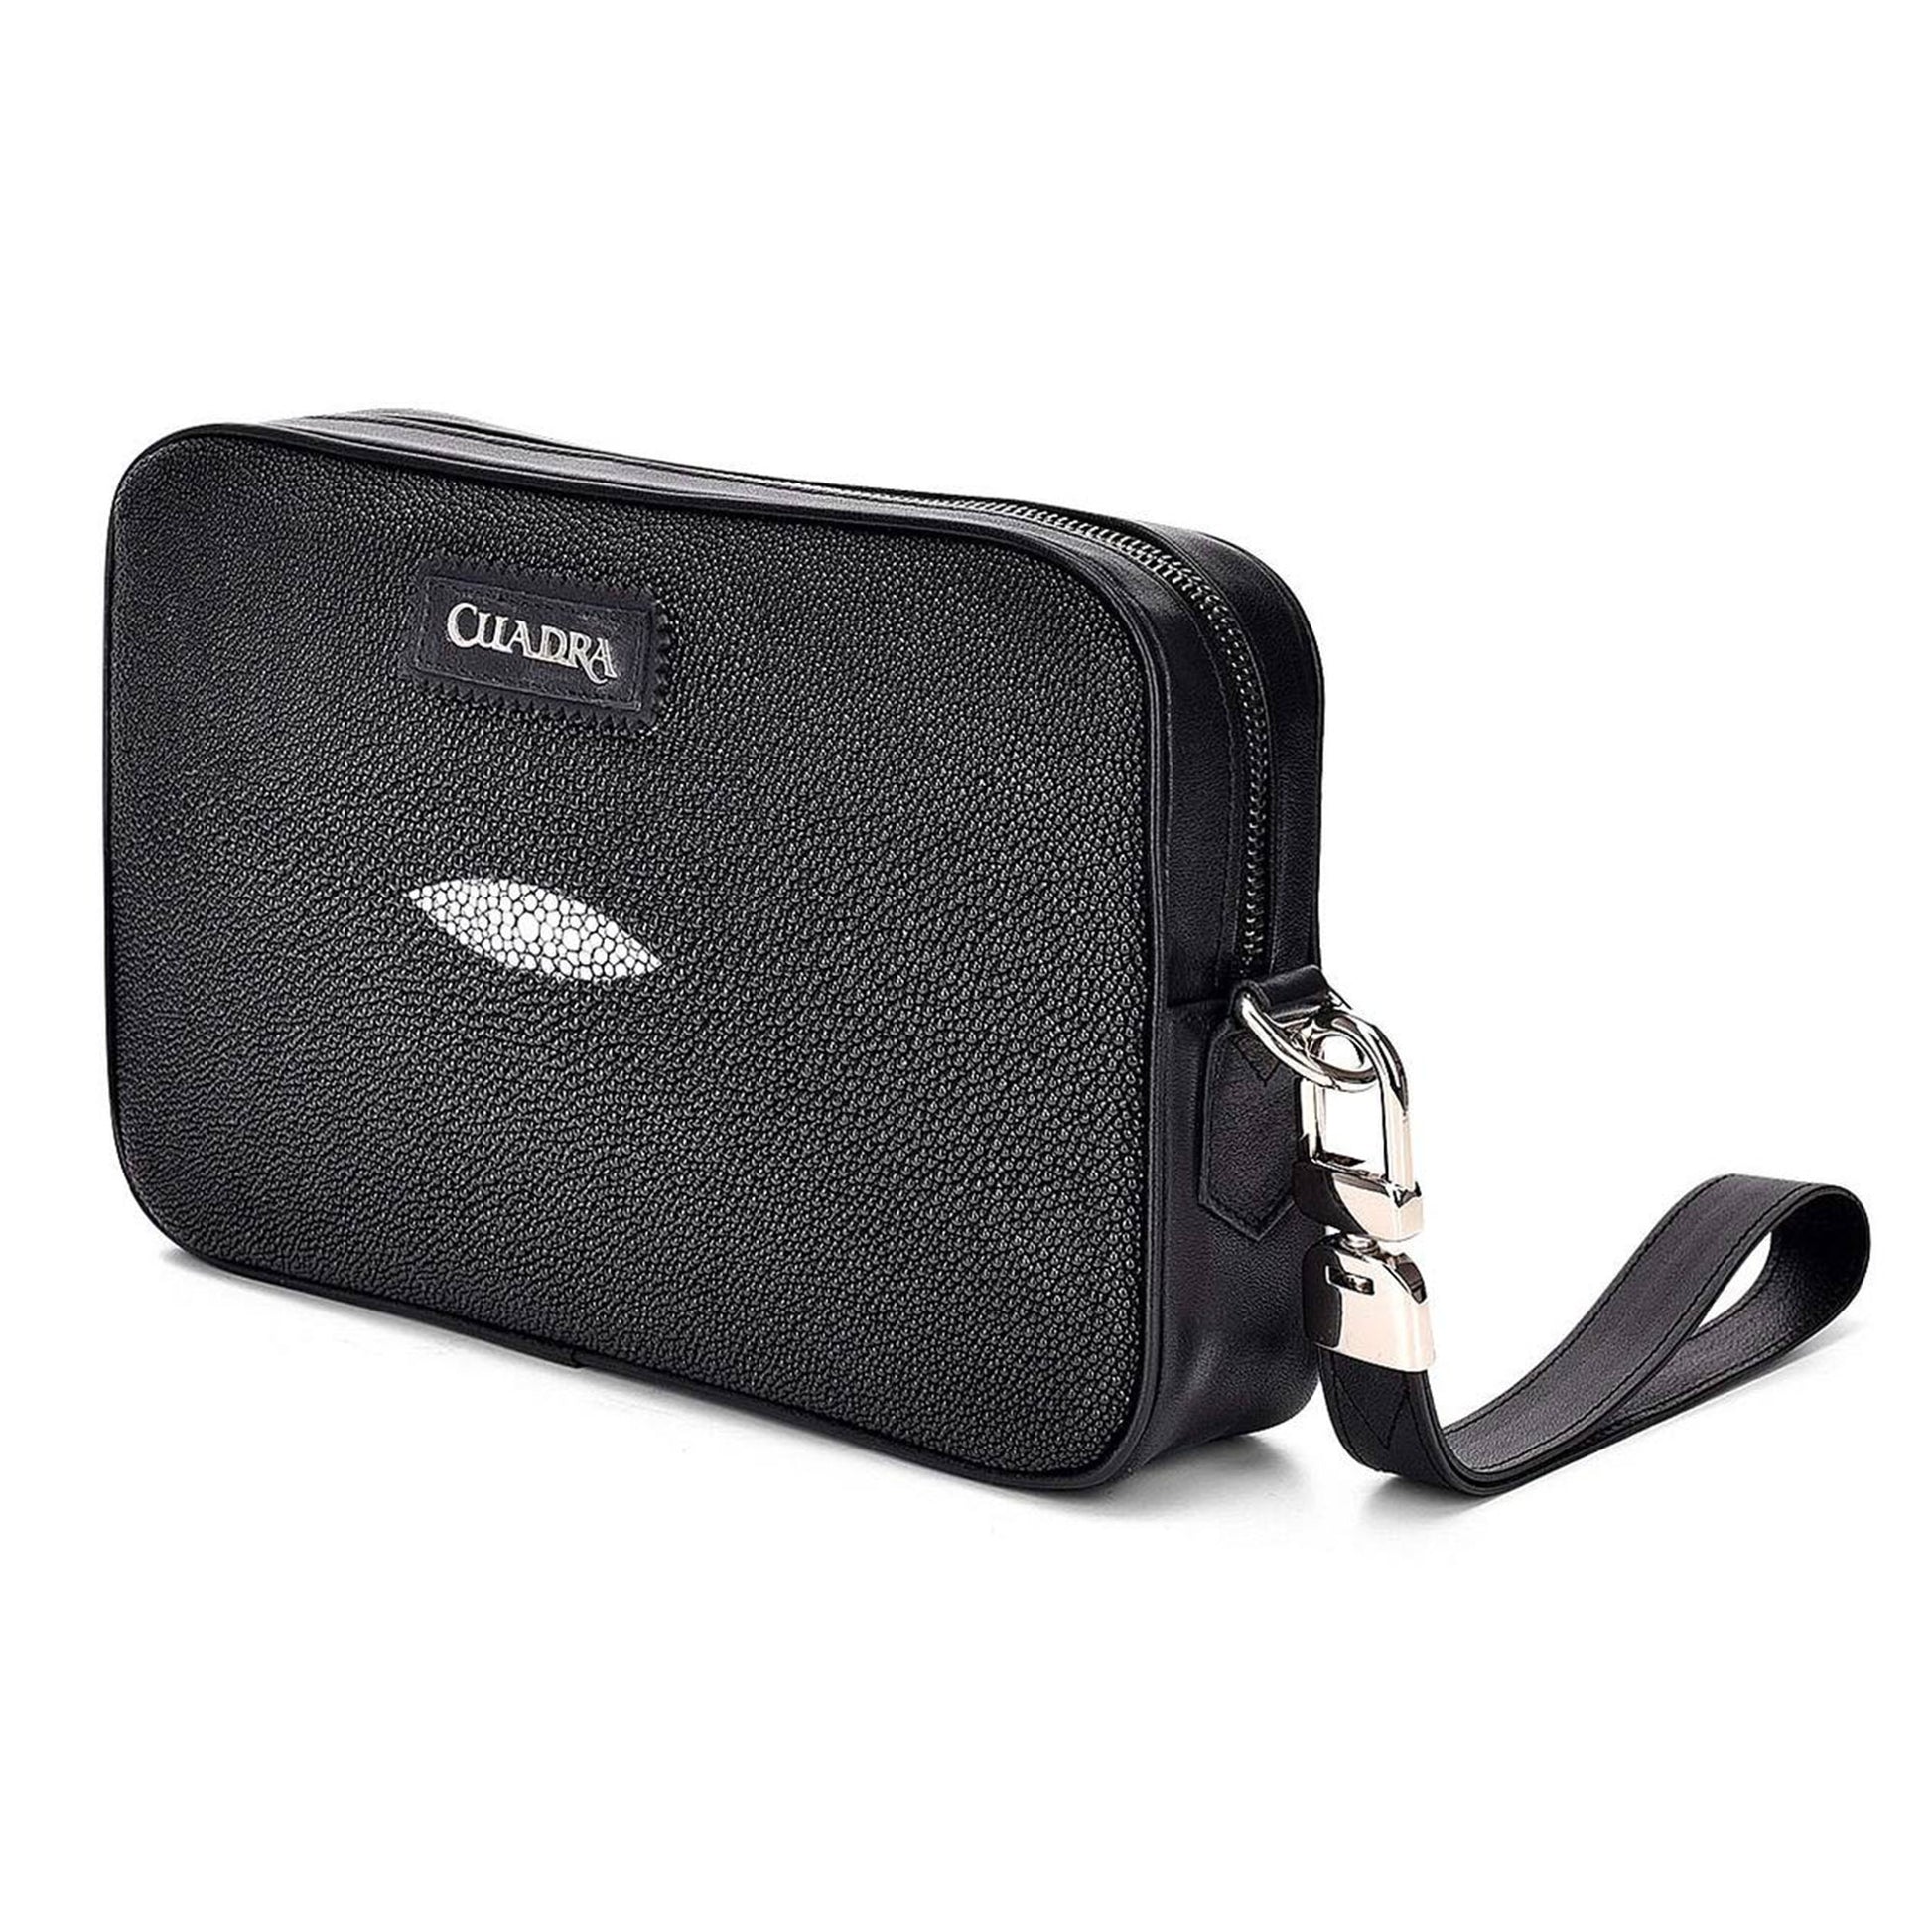 Black leather document bag, with metallic details.